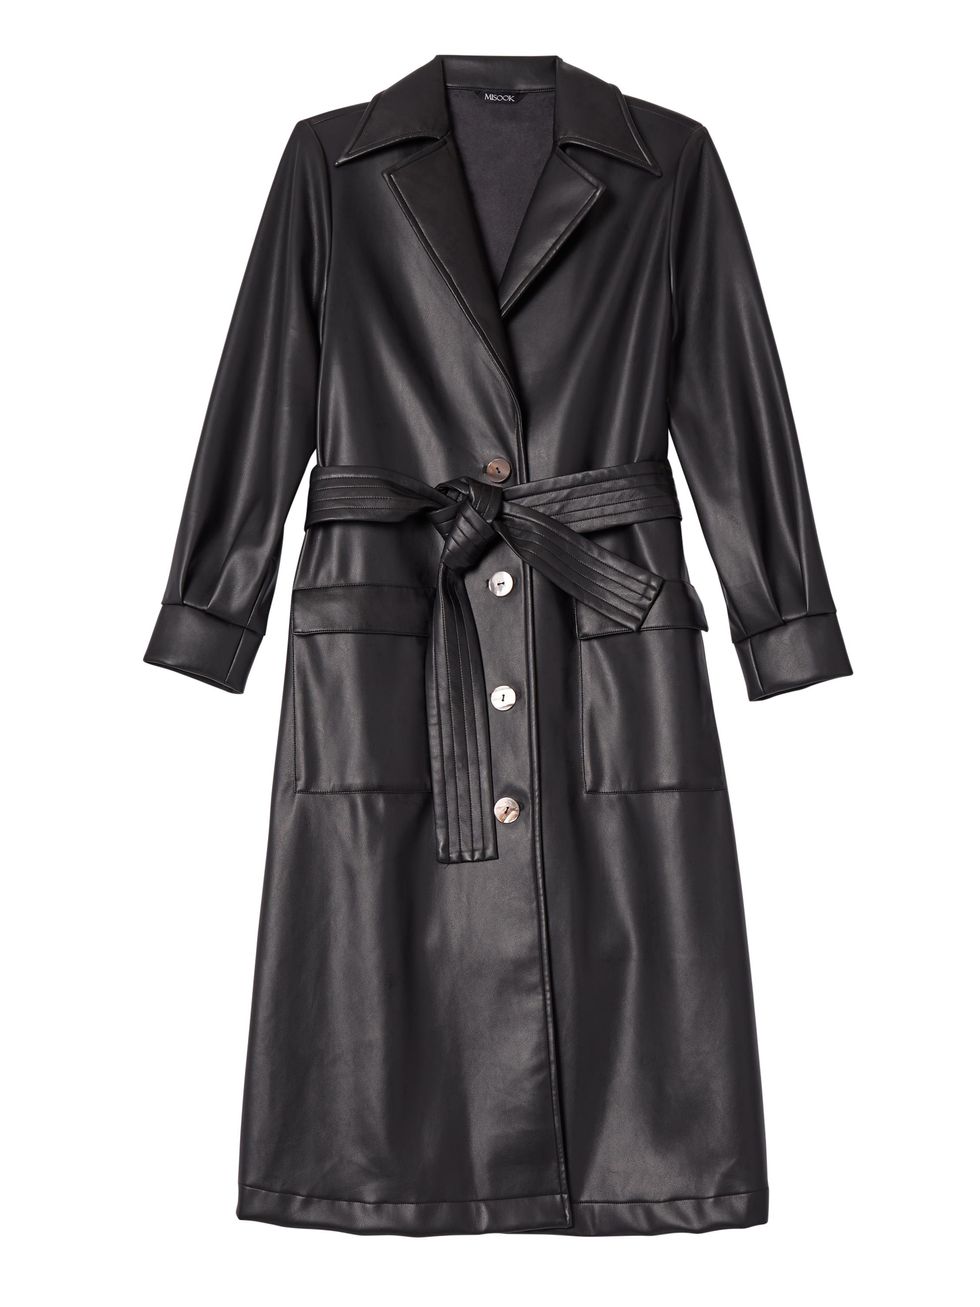 black leather trench coat